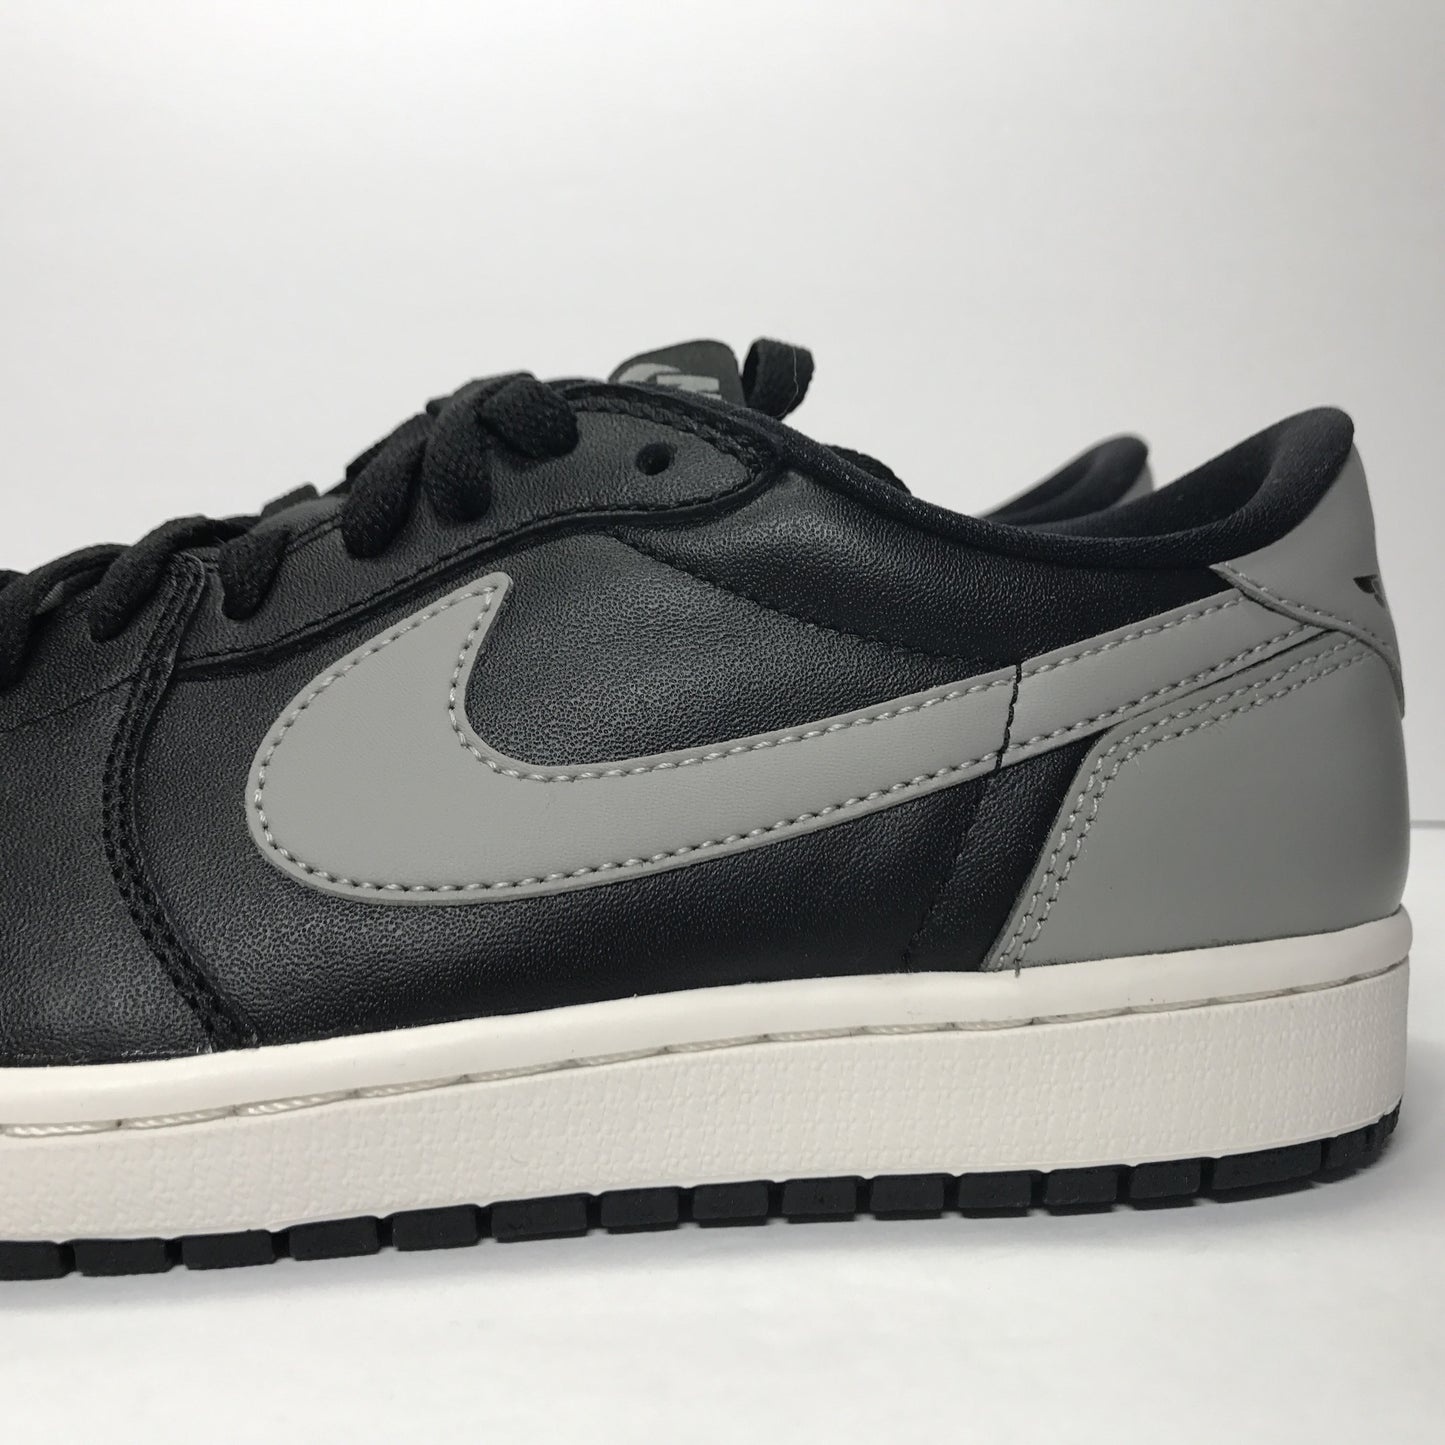 Nike Air Jordan 1 I Retro Low Shadow 705329 003 Homme Taille 13